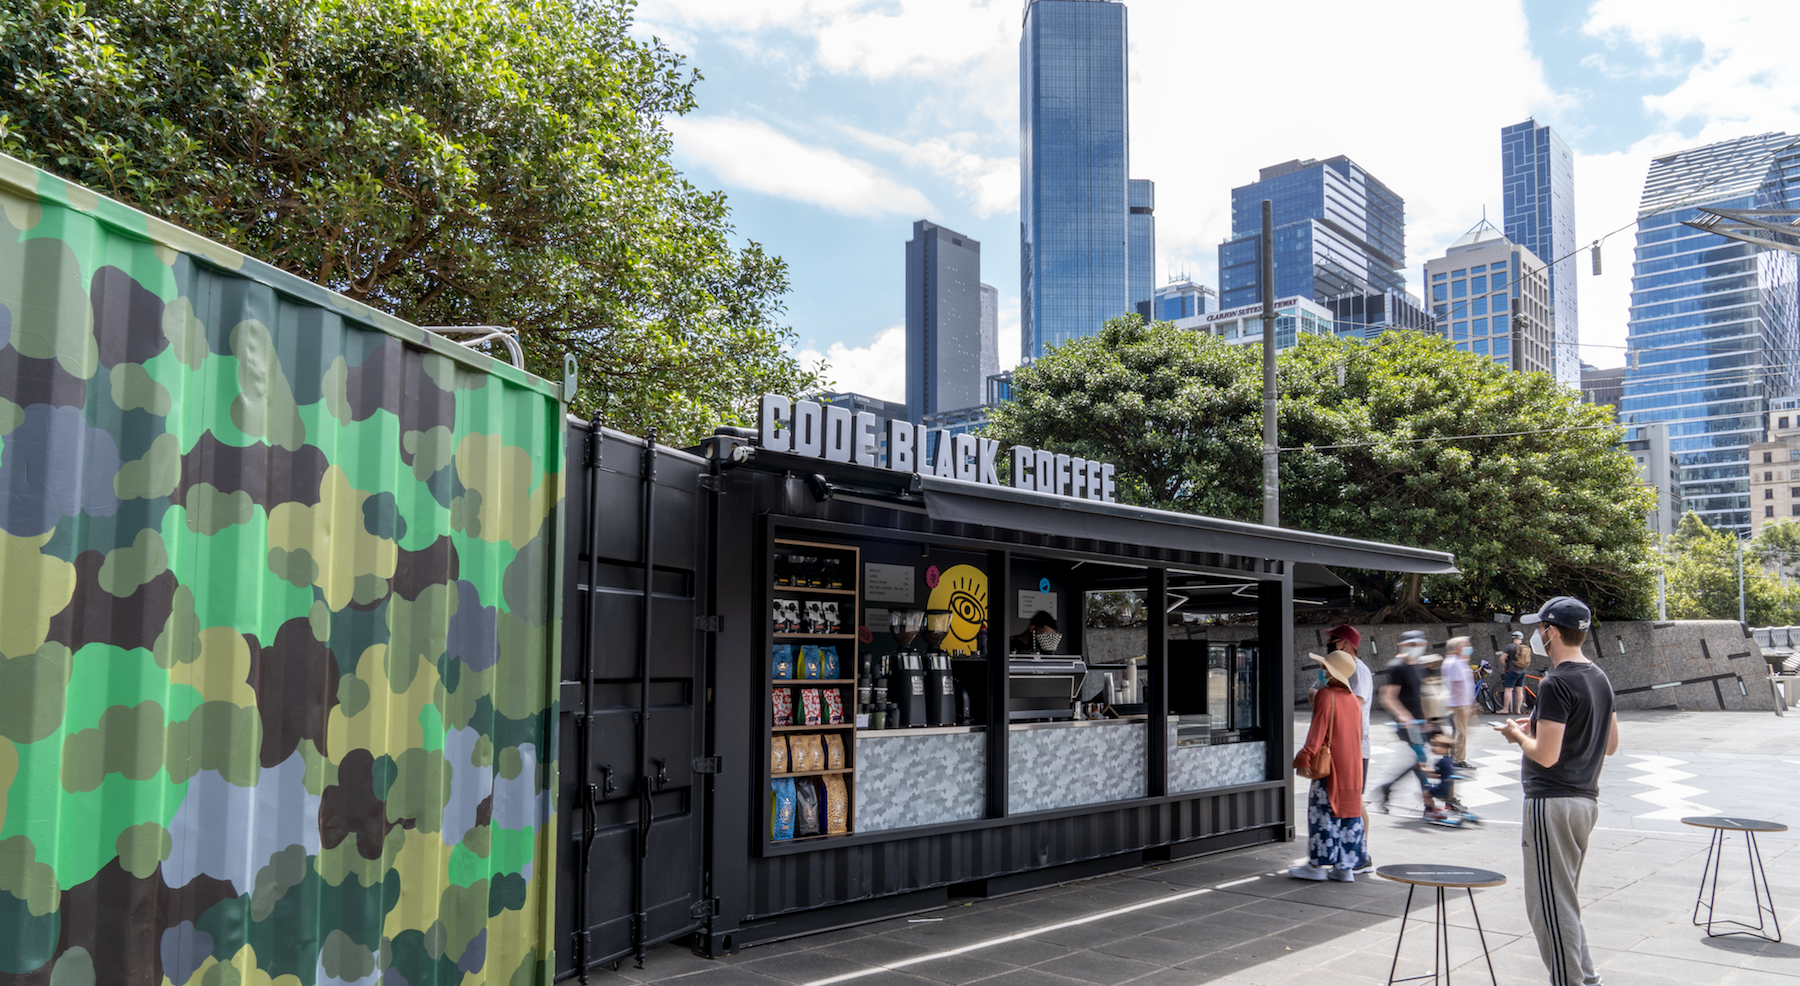 Located between Melbourne’s Crown Casino at South Bank and the Red Stairs, Queensbridge is the perfect city stop for a Code Black brewed coffee including takeaway coffee and coffee beans for home.